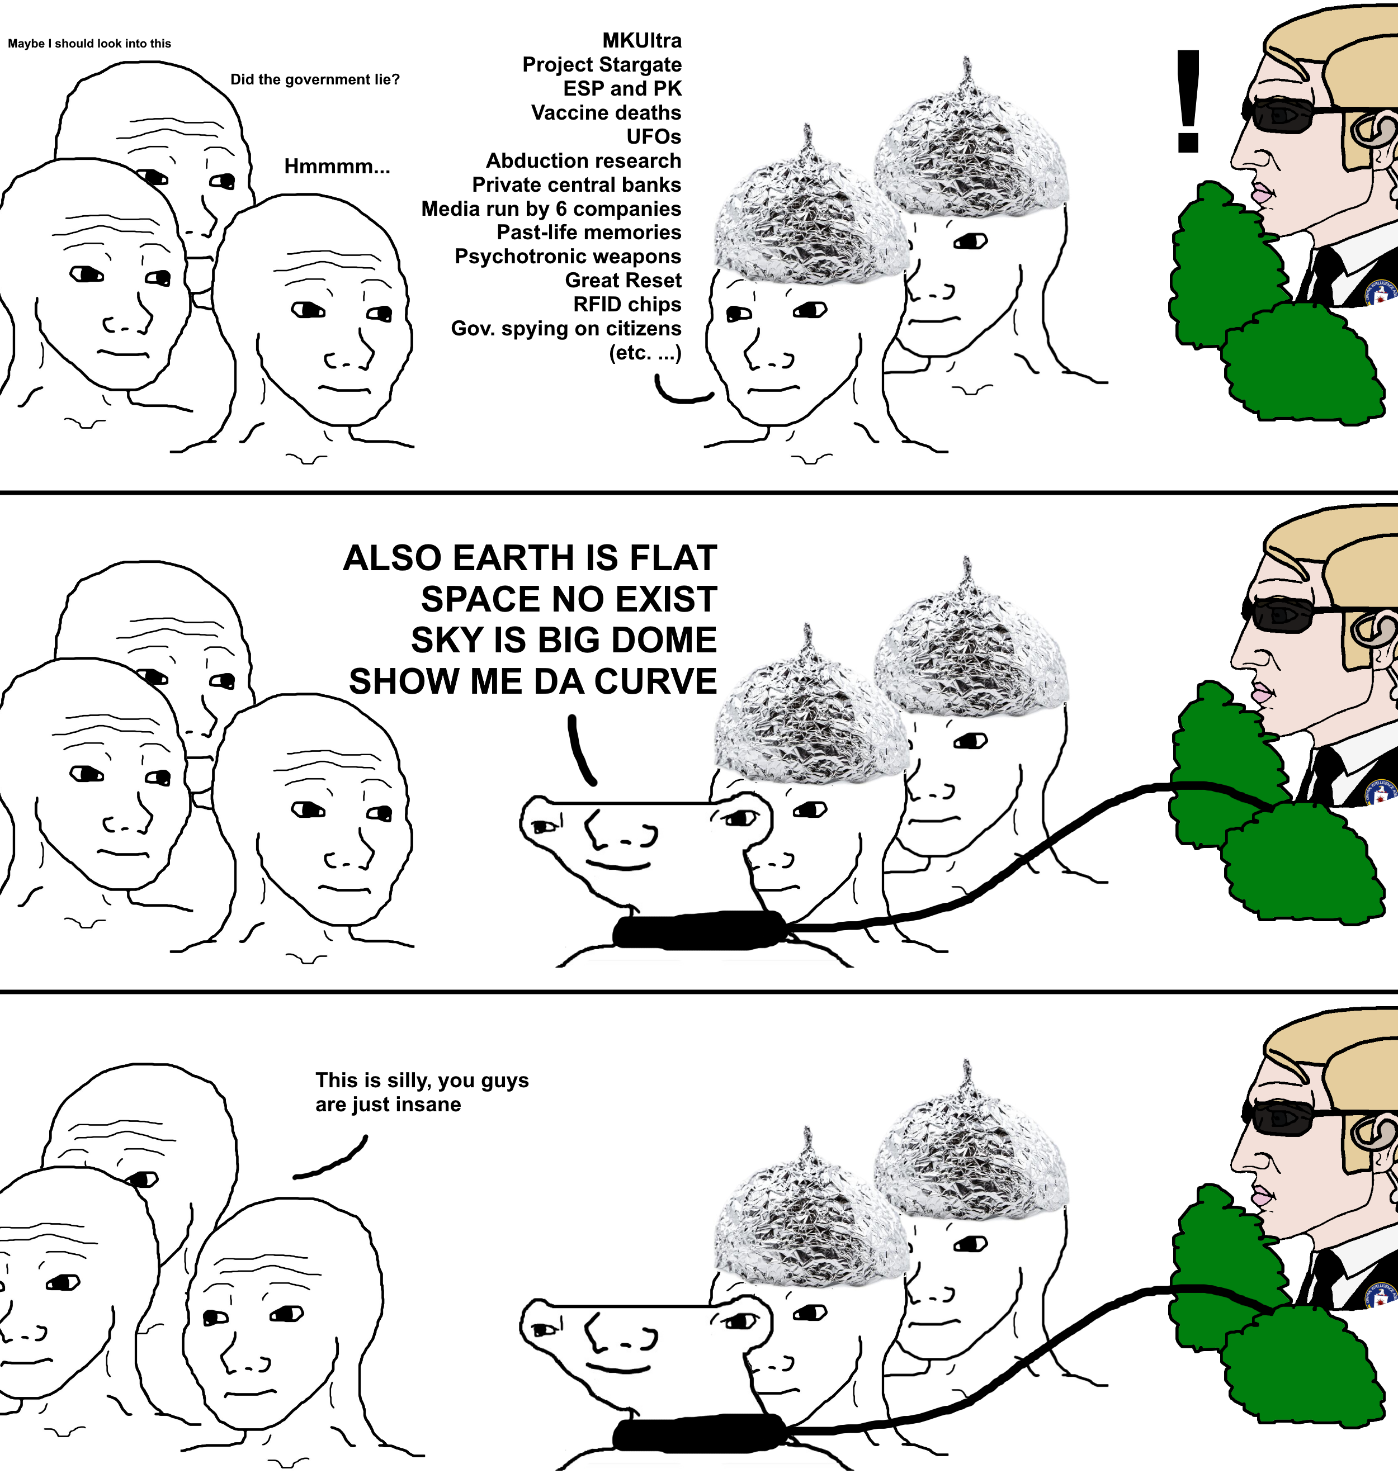 Meme about federal agents inserting flat earthers into discussions of alternative or conspiracy theories